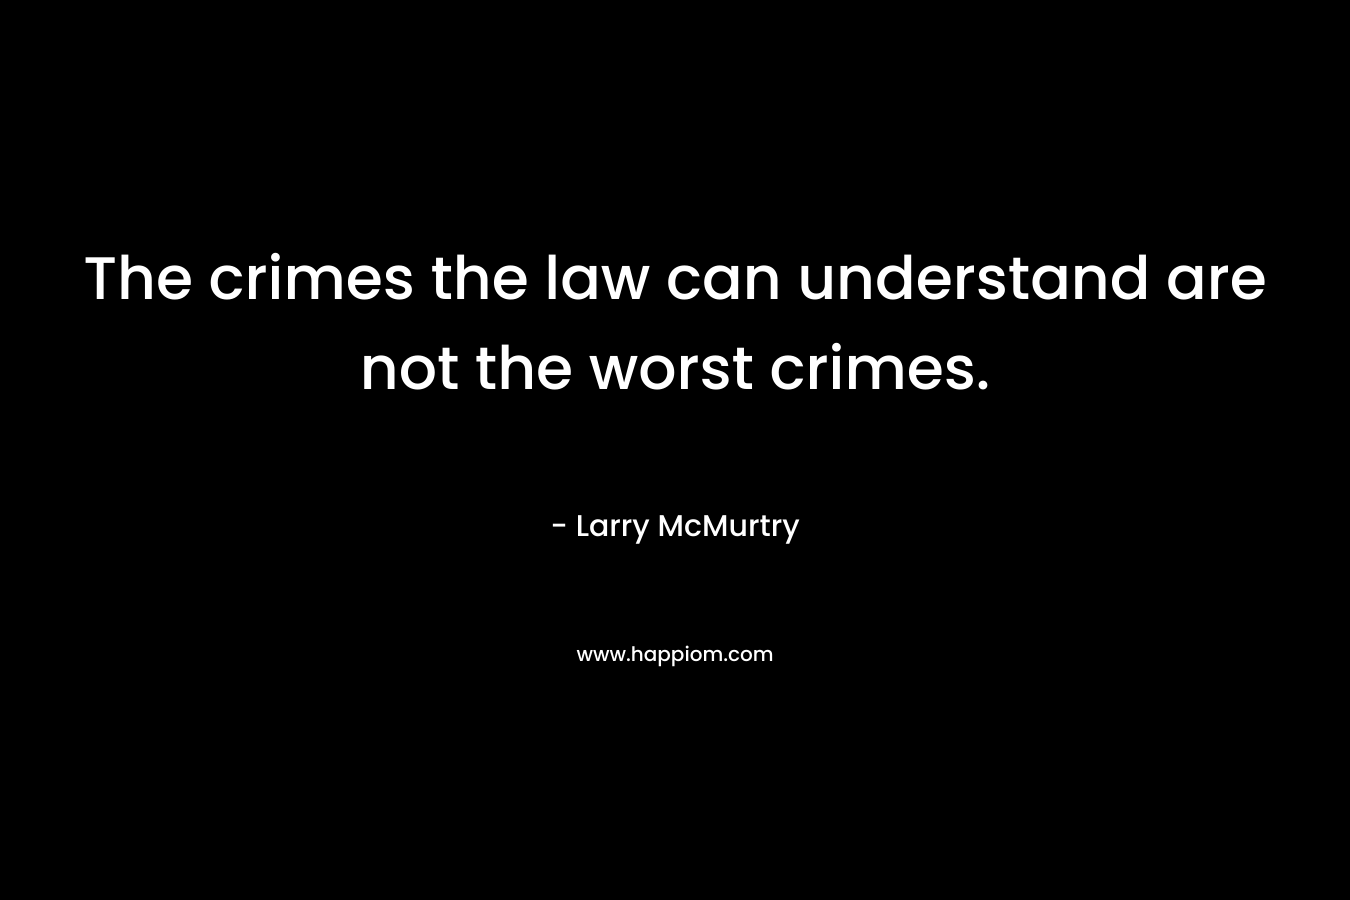 The crimes the law can understand are not the worst crimes.